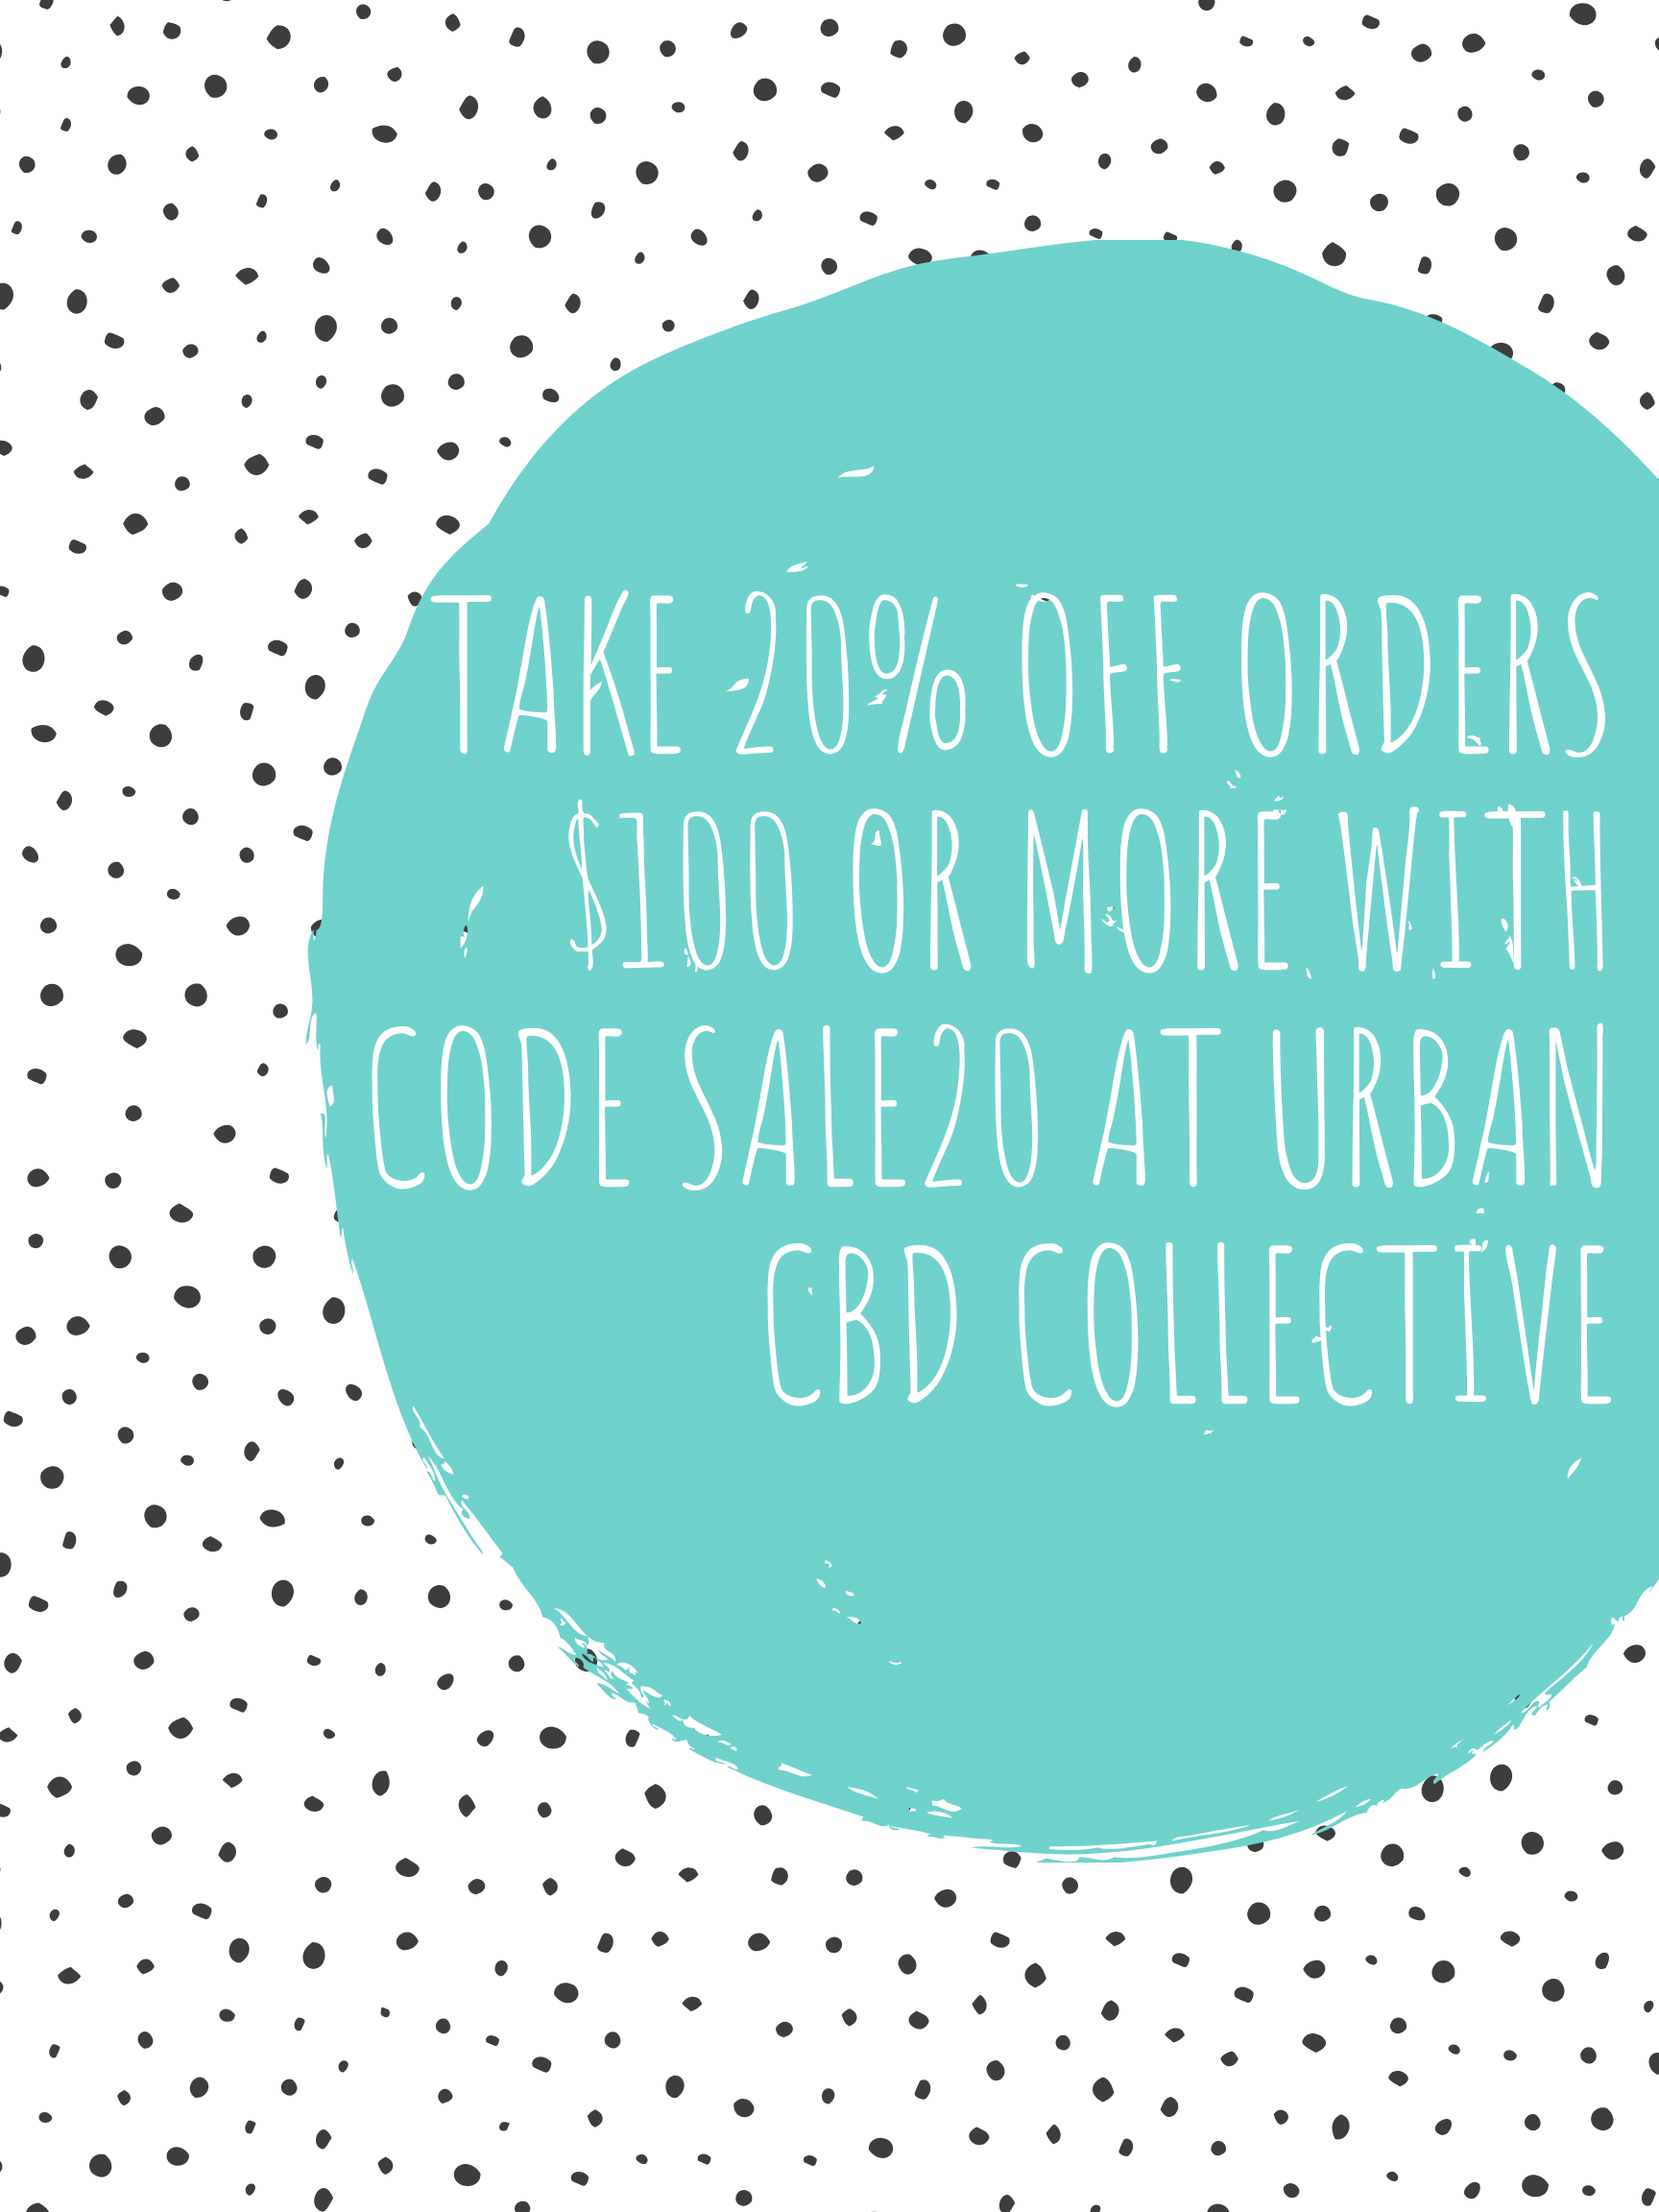 Take 20% off your orders $100 or more with code SALE20 at checkout at Urban CBD Collective